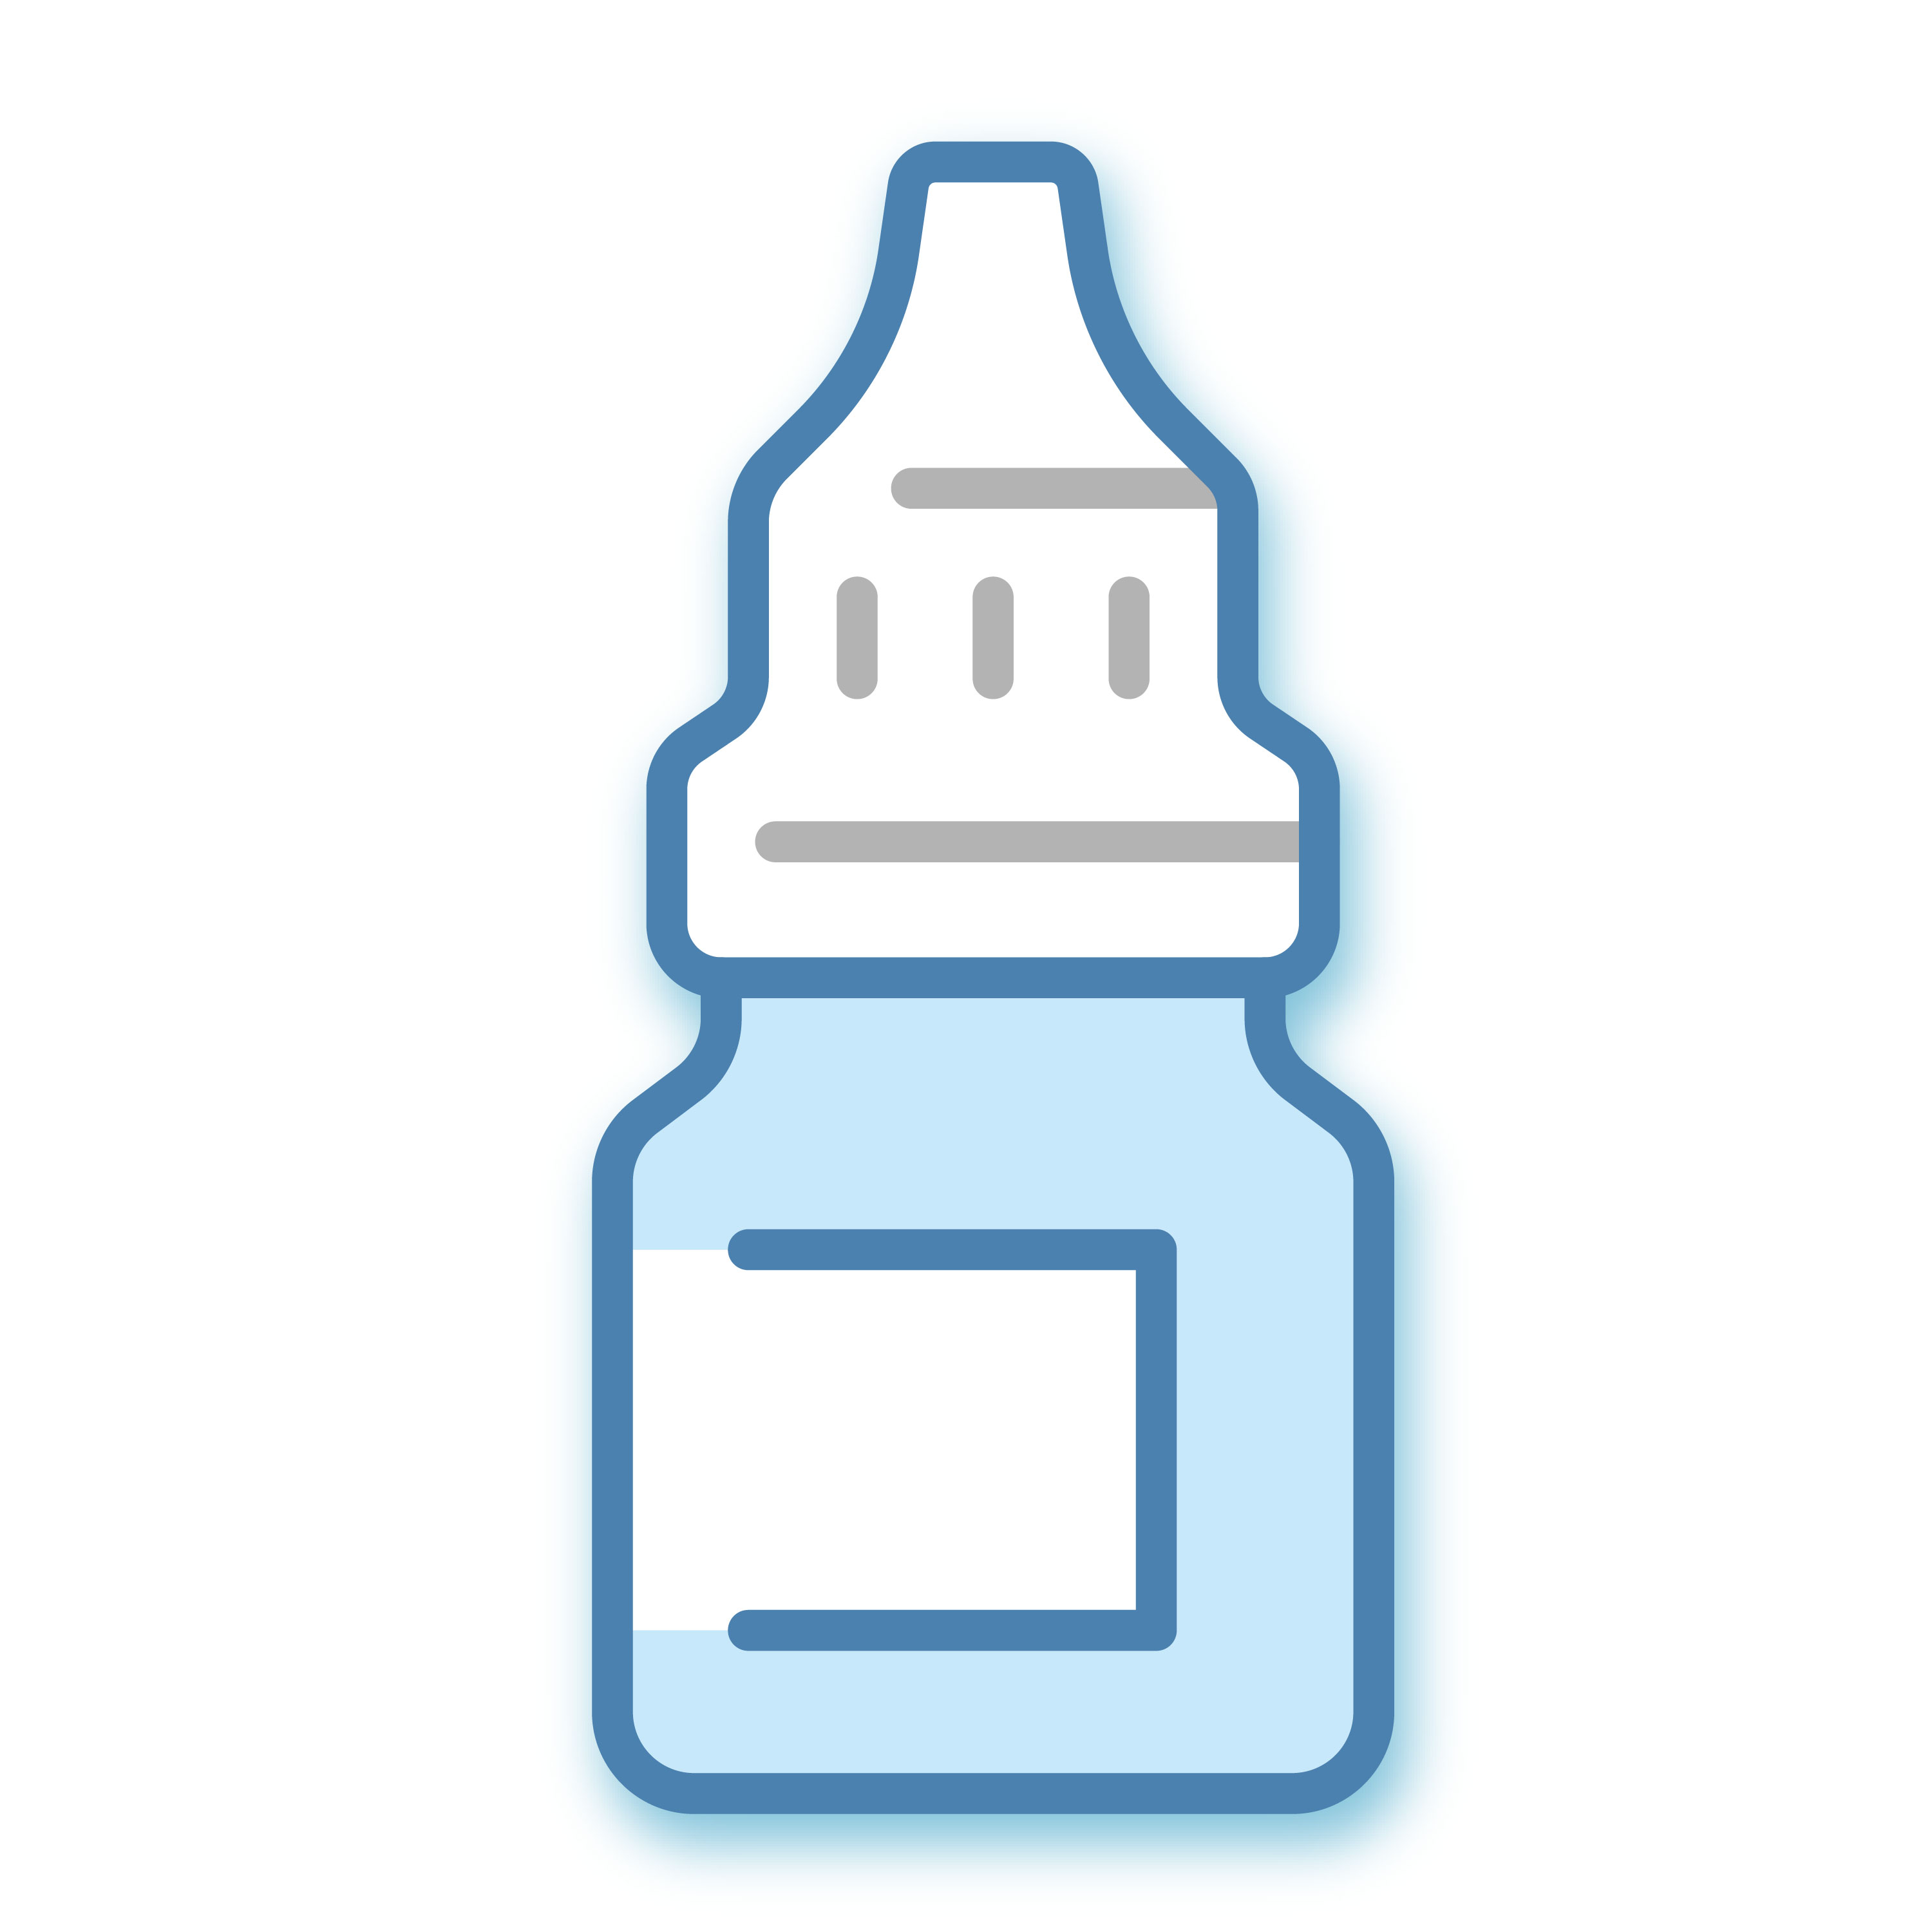 Traditional preservative-containing eye drops